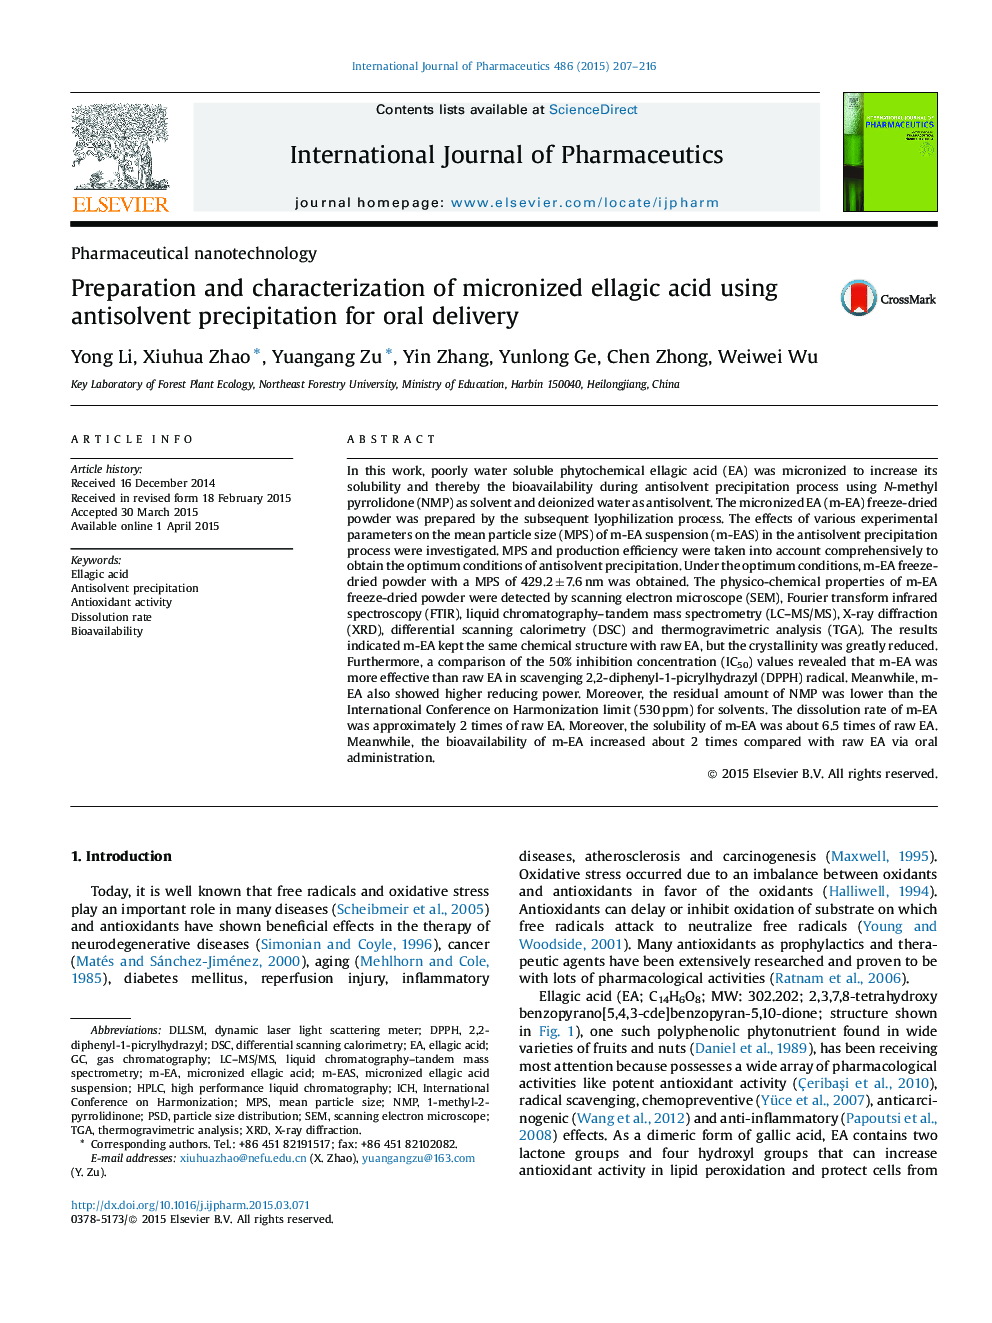 Preparation and characterization of micronized ellagic acid using antisolvent precipitation for oral delivery